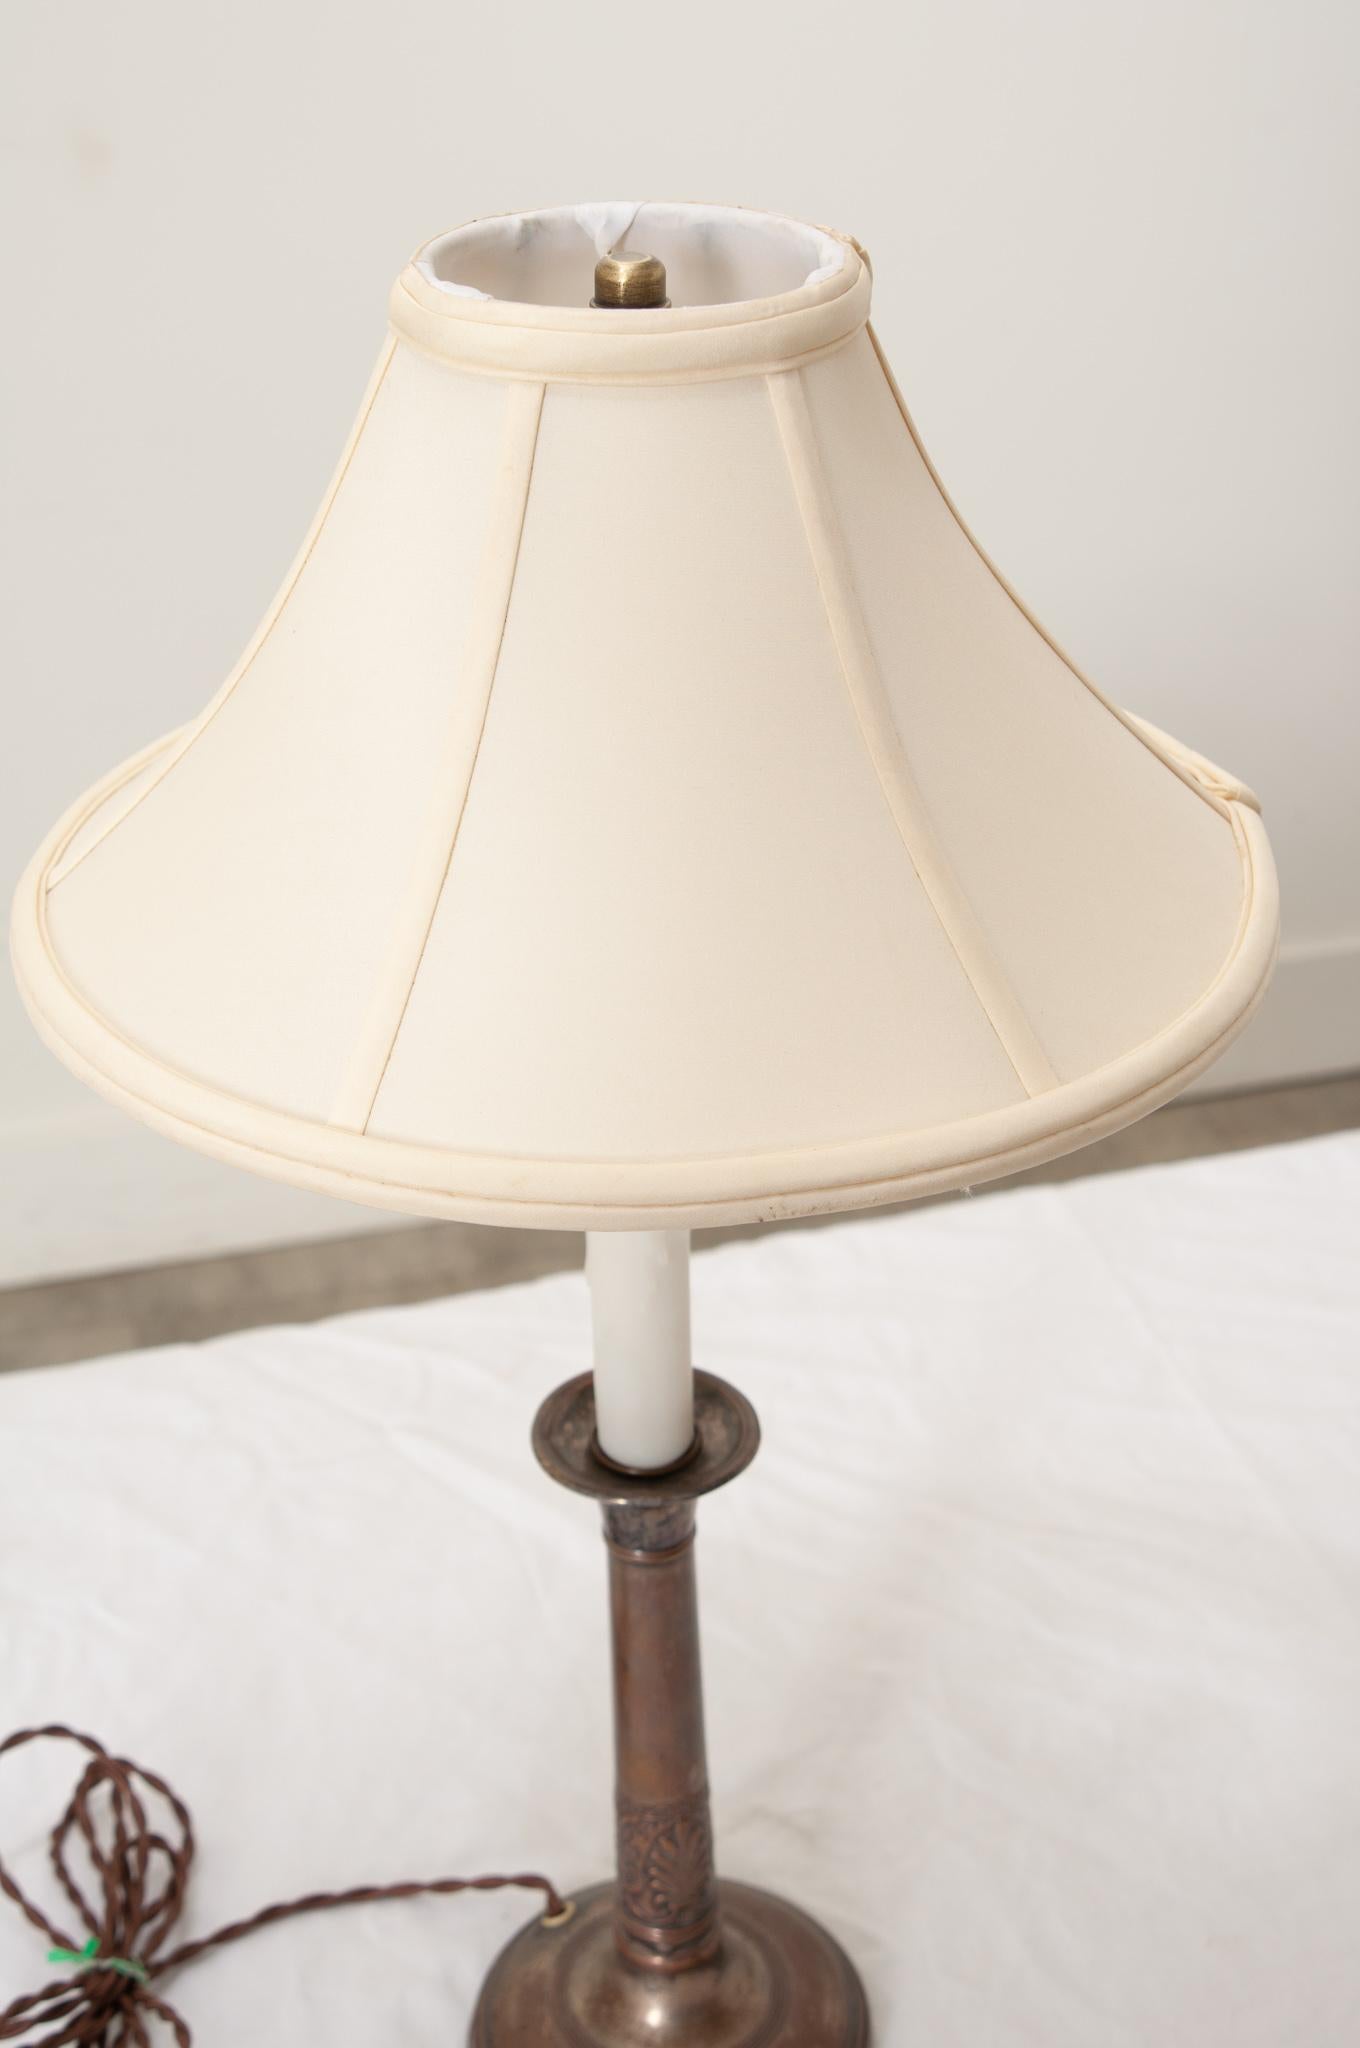 French Vintage Candlestick Lamp with New Shade In Good Condition For Sale In Baton Rouge, LA